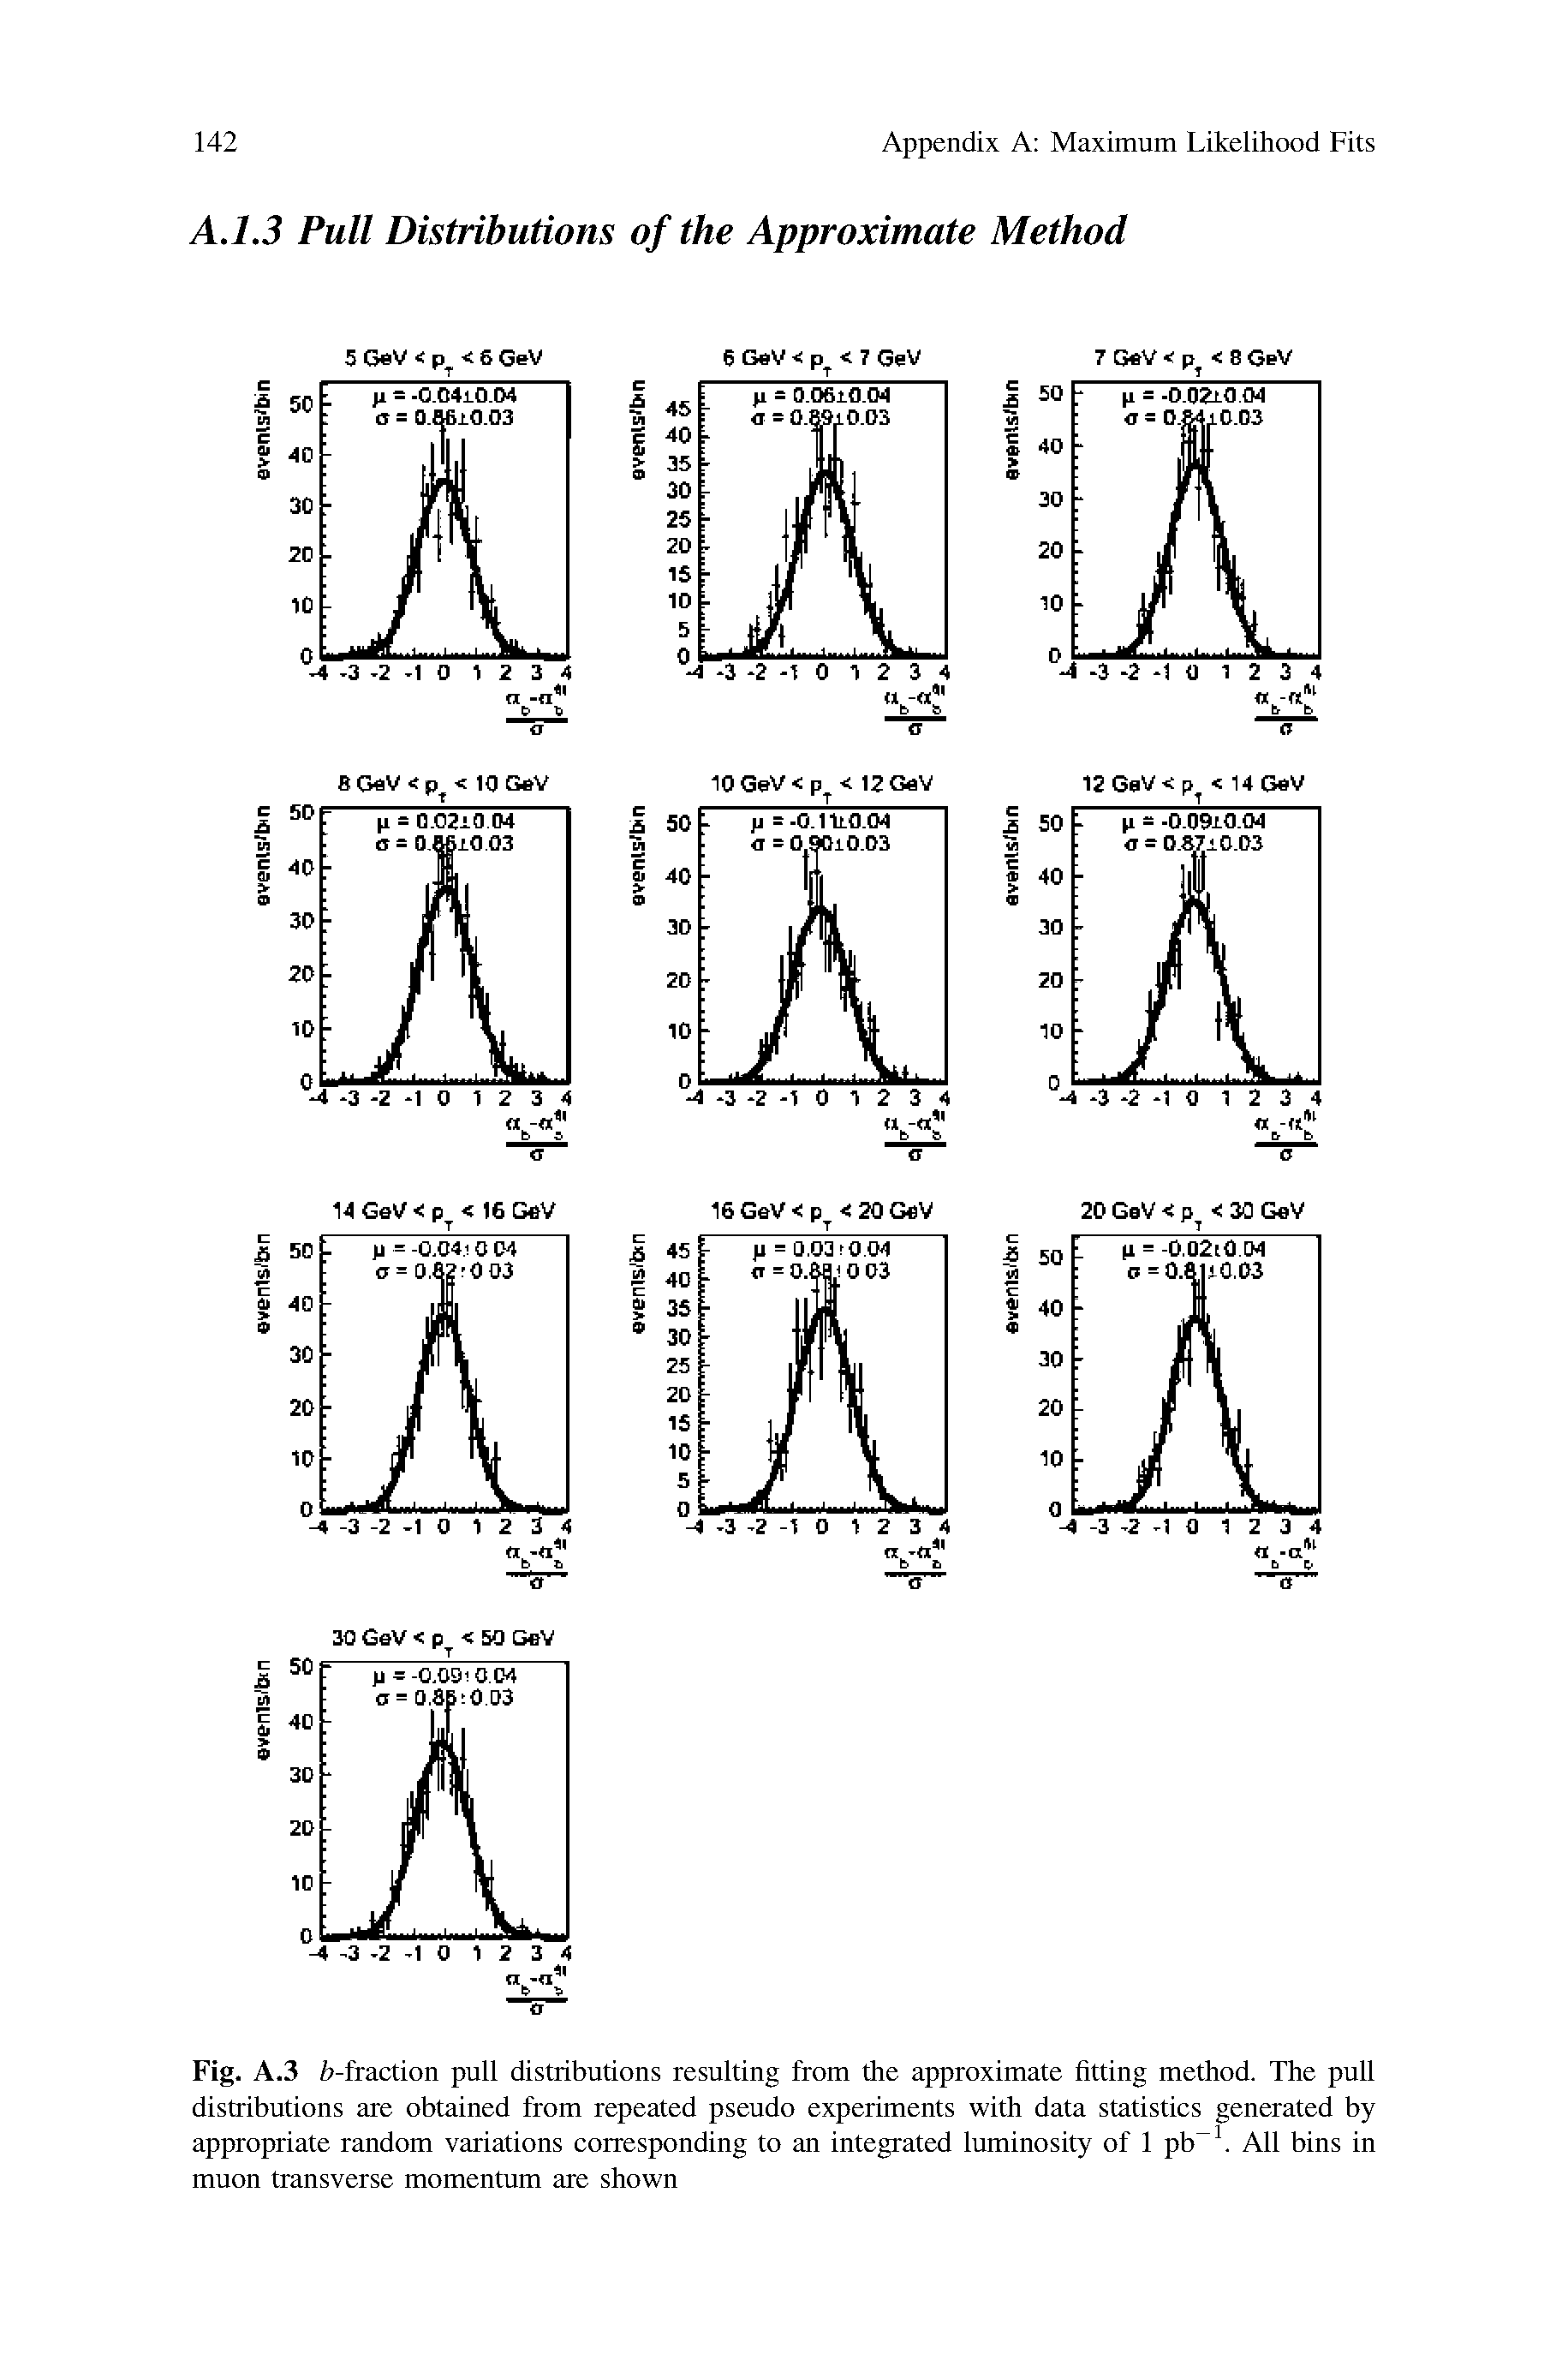 Fig. A.3 / -fraction pull distributions resulting from the approximate fitting method. The pull distributions are obtained from repeated pseudo experiments with data statistics generated by...